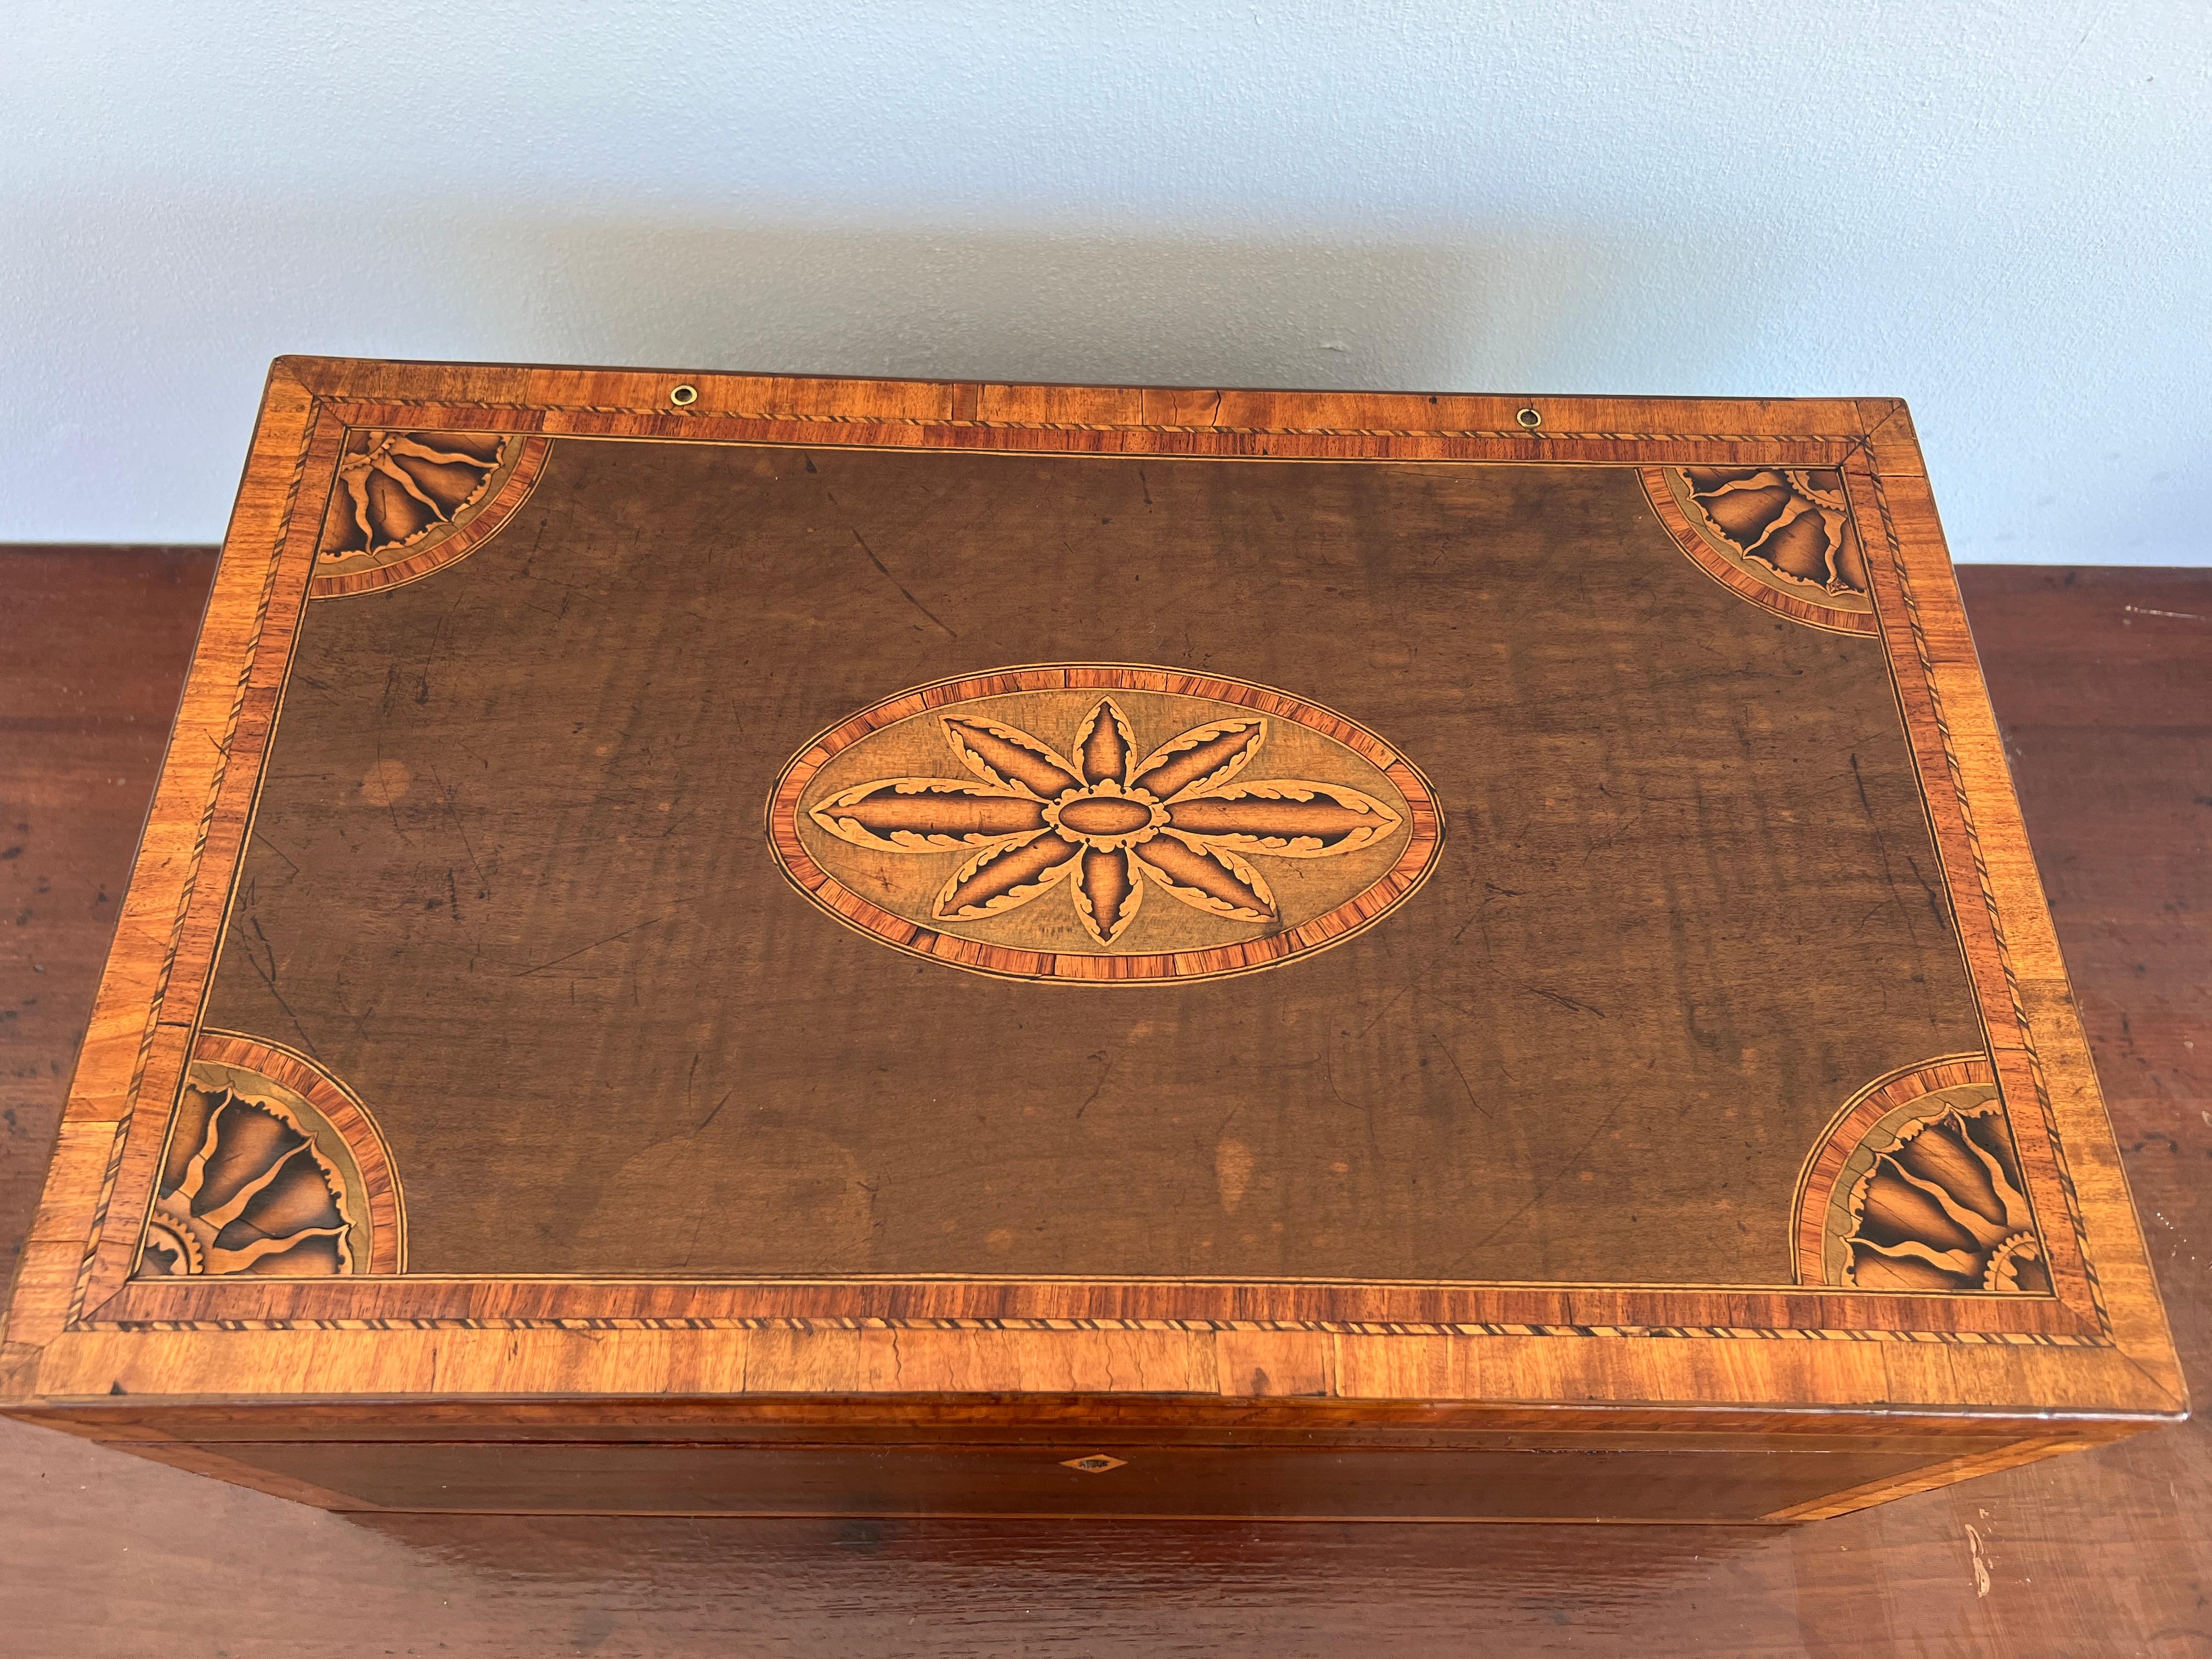 English, circa early 1800's. 

An exceptional and rare 19th century mahogany lap desk inlaid with impressive arrays of sunbursts to the corners and central sun form motif. These motifs have showed up on some of the best English pieces of furniture